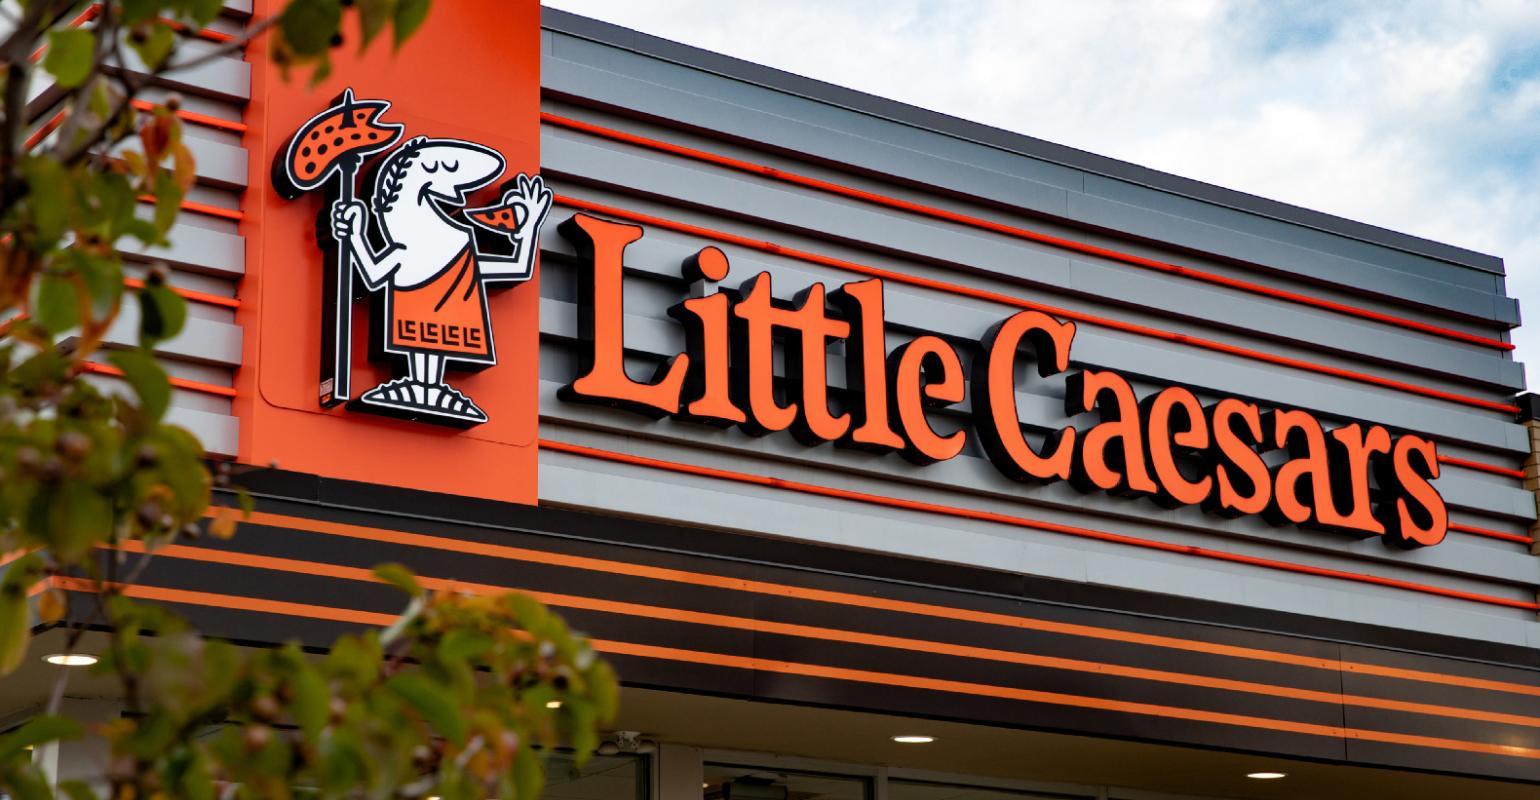 Three new technology executives join the team at Little Caesars